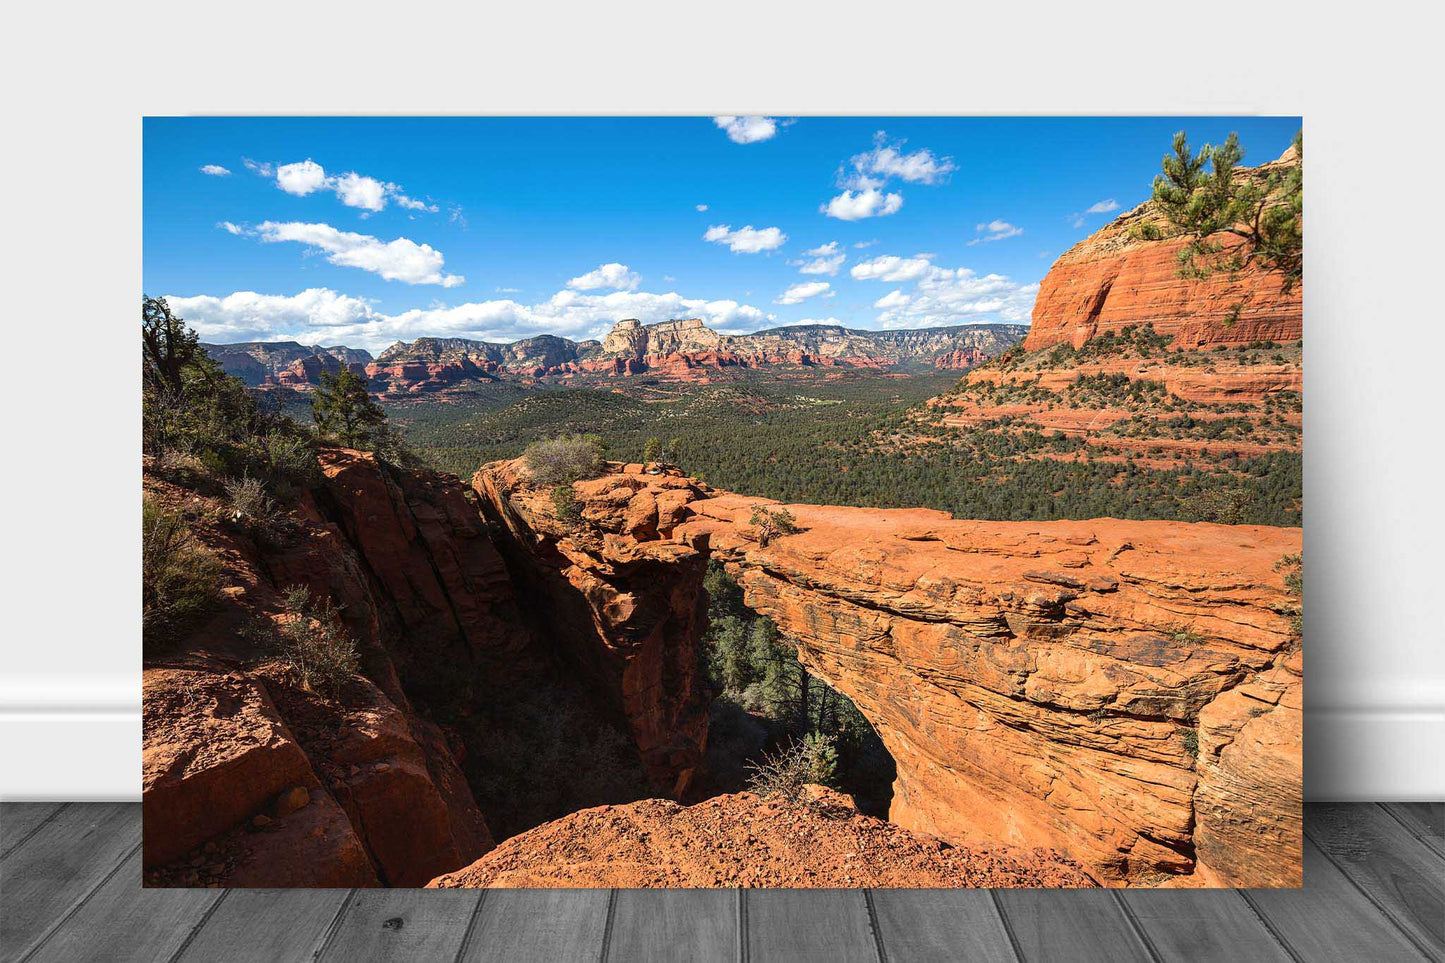 Desert landscape metal print of Devils Bridge on a beautiful day in the Coconino National Forest near Sedona, Arizona by Sean Ramsey of Southern Plains Photography. 